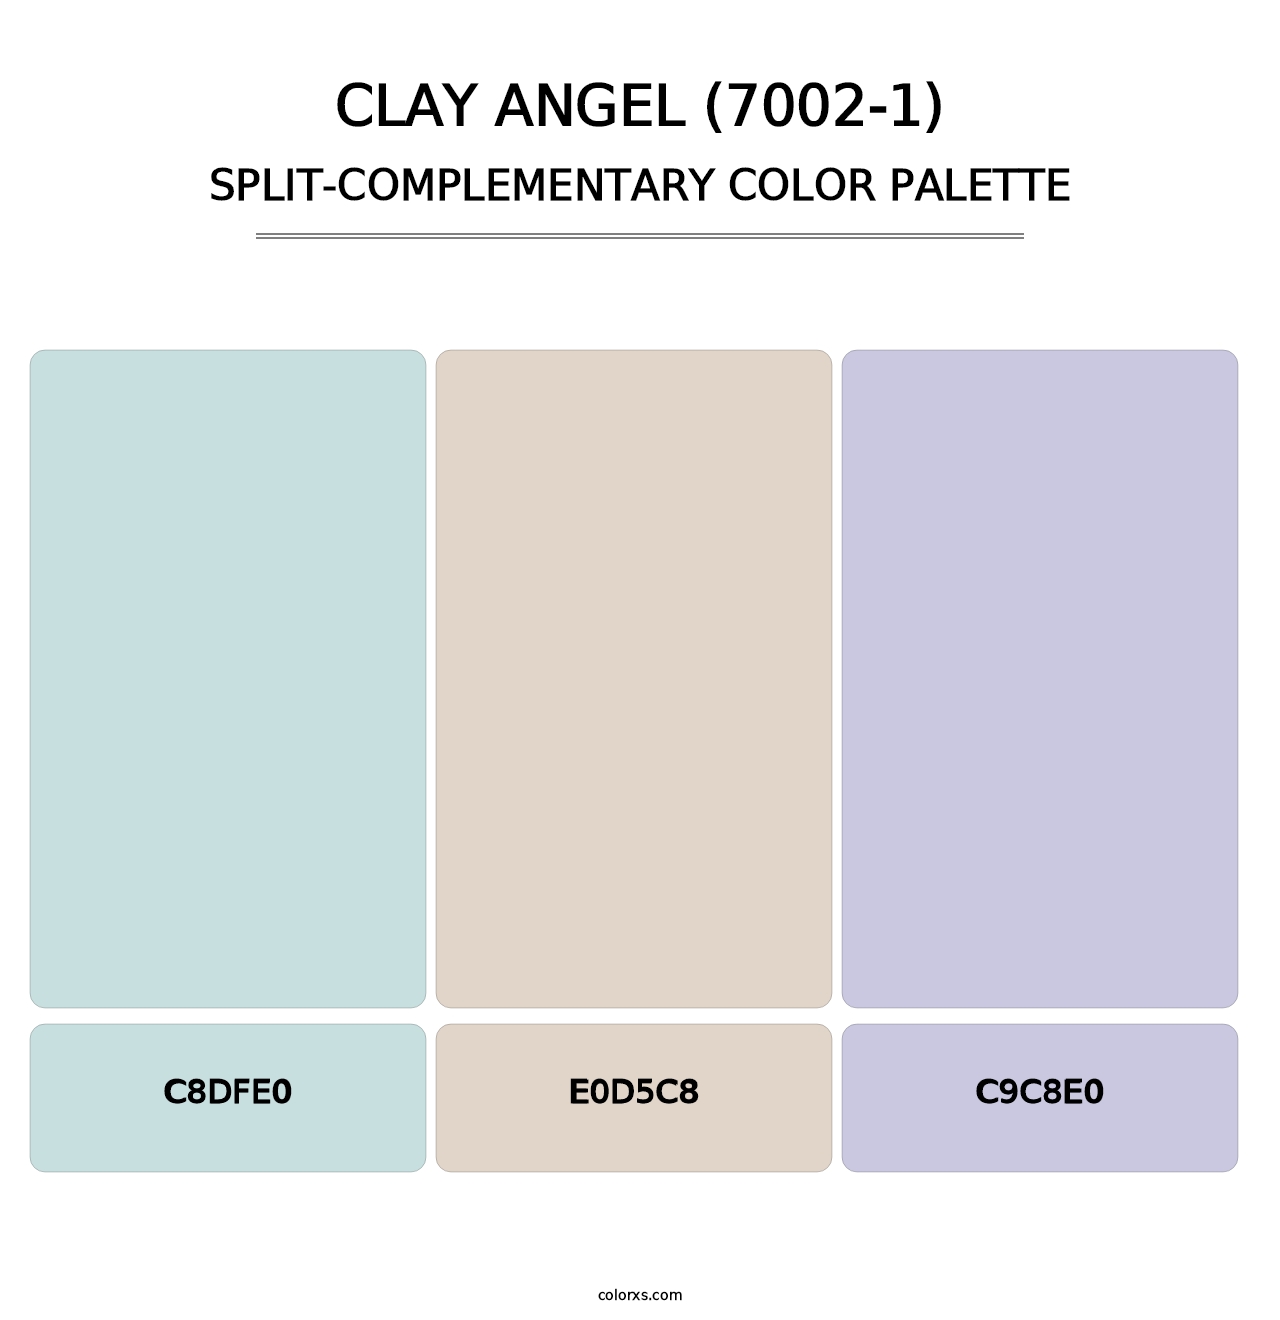 Clay Angel (7002-1) - Split-Complementary Color Palette